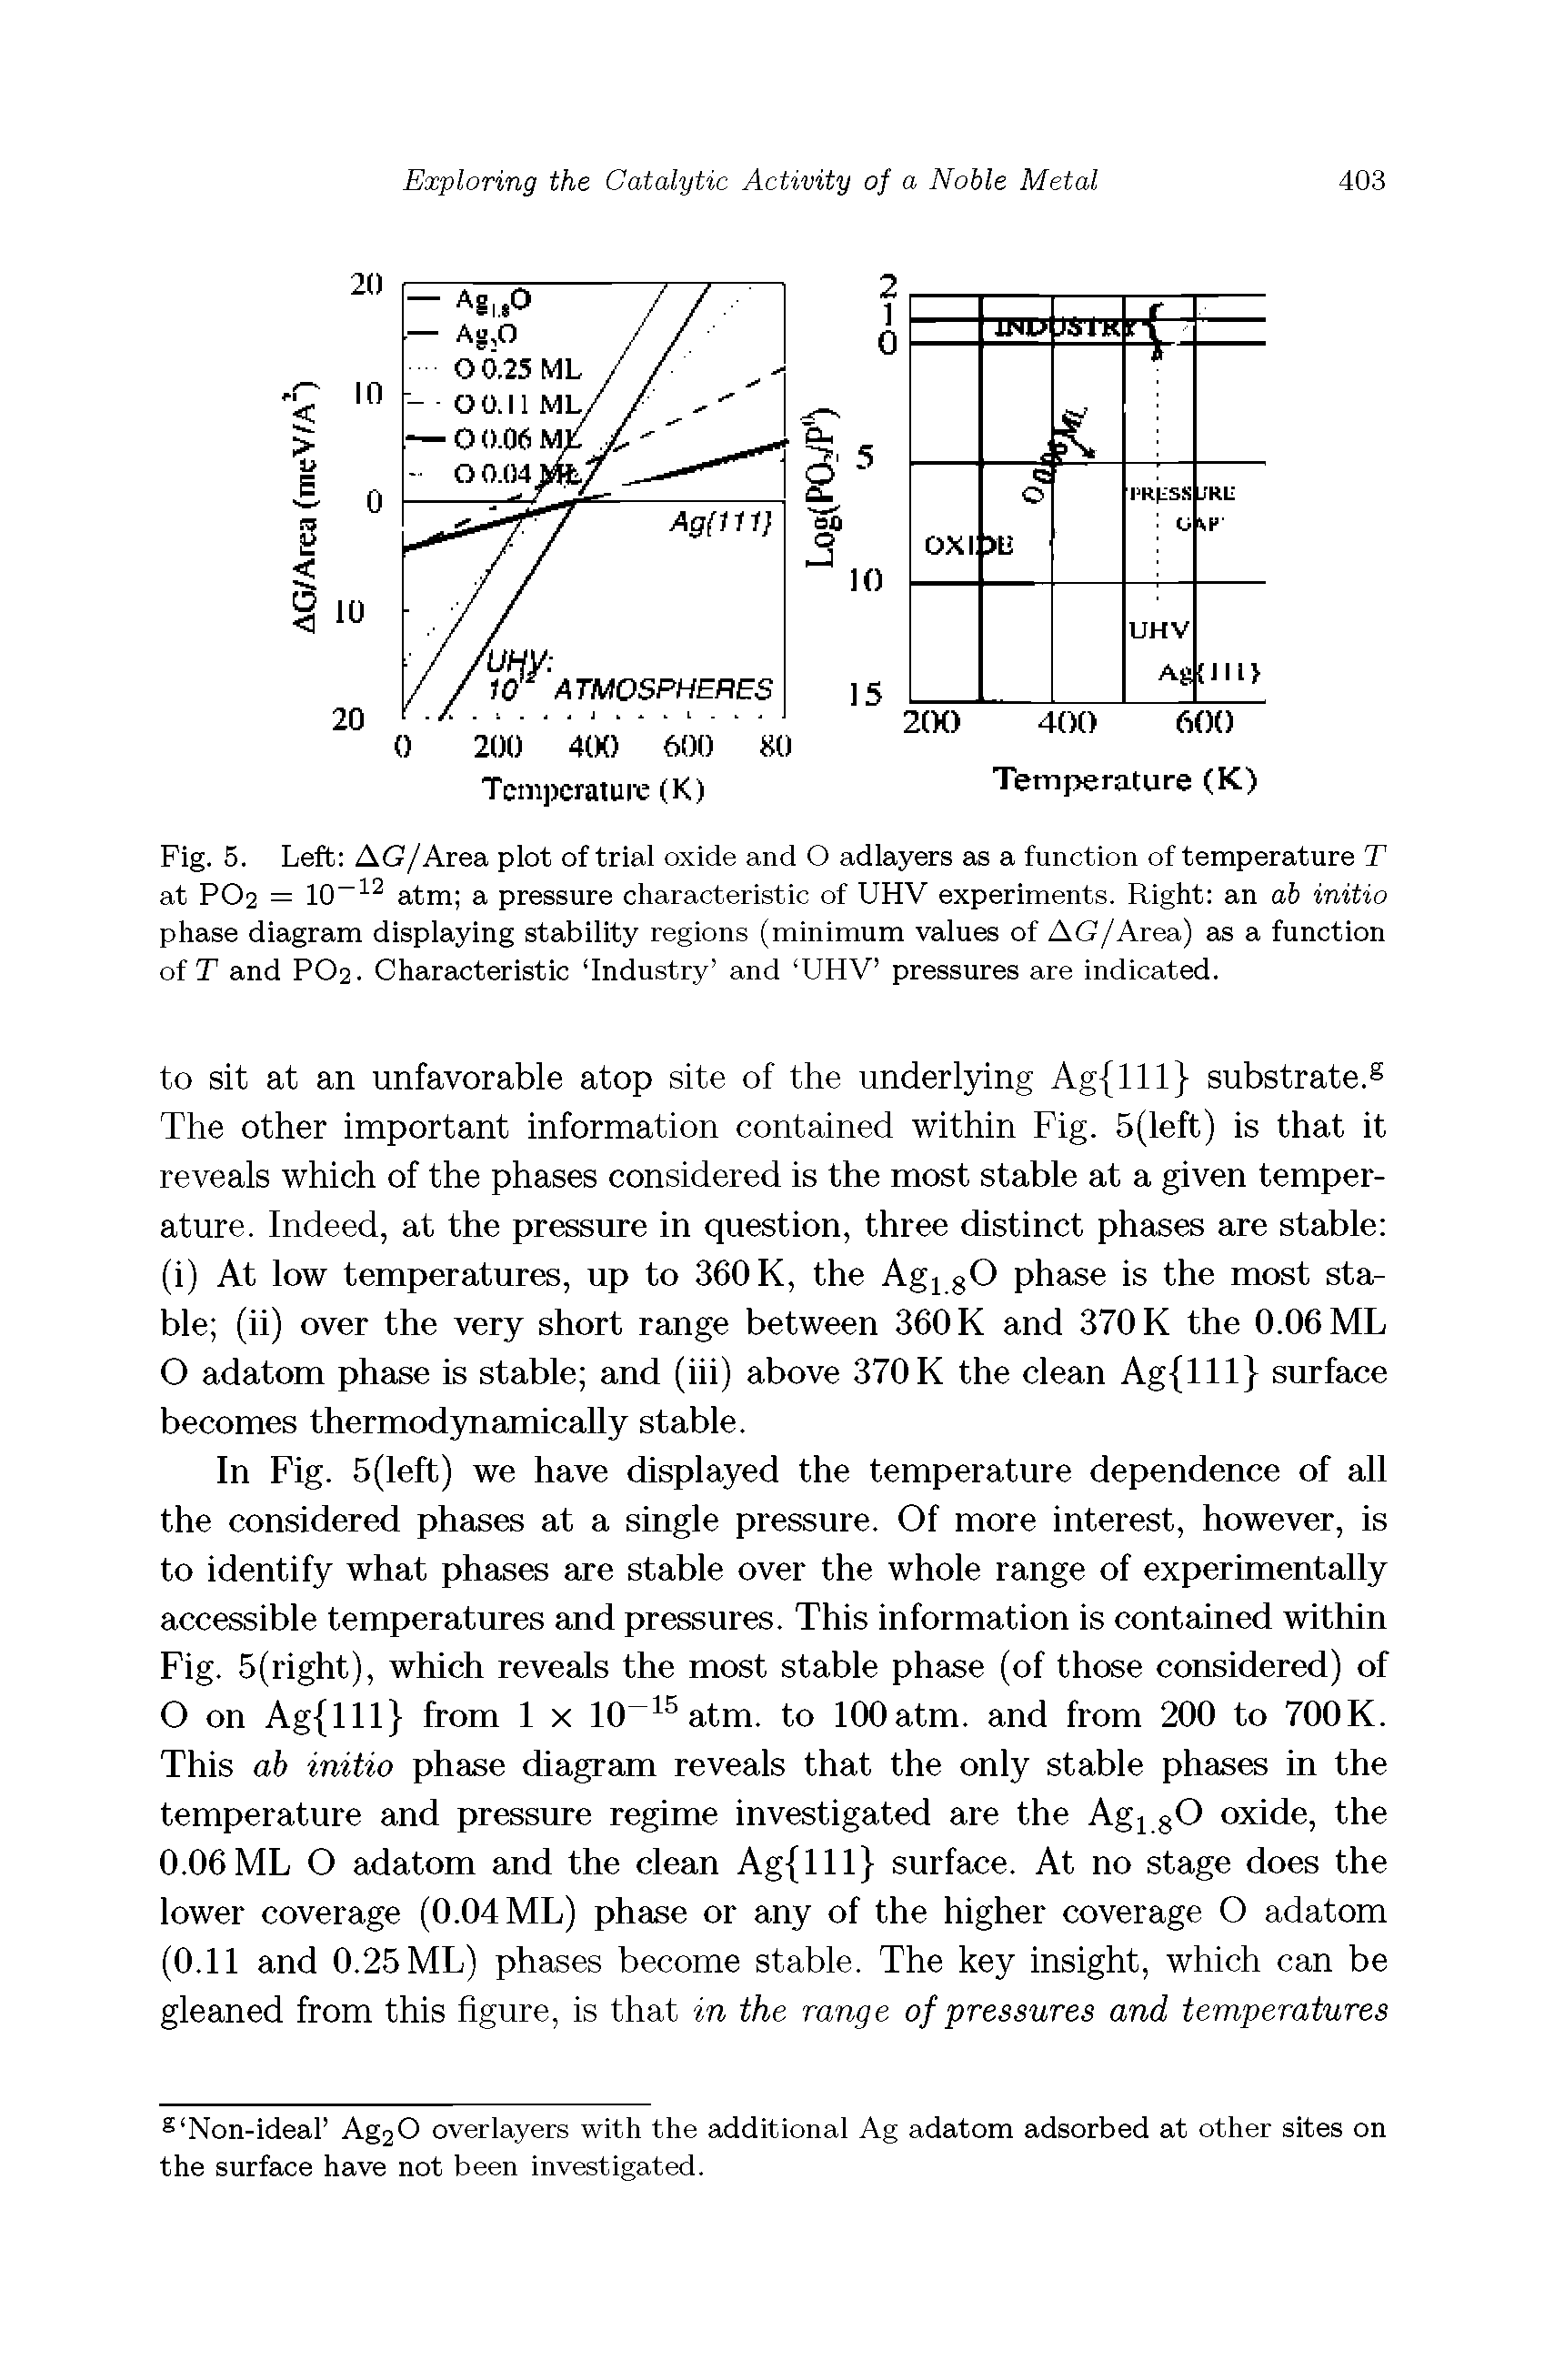 Fig. 5. Left AG/Area plot of trial oxide and O adlayers as a function of temperature T at PO2 = 10—12 atm a pressure characteristic of UHV experiments. Right an ab initio phase diagram displaying stability regions (minimum values of AG/Area) as a function of T and PO2. Characteristic Industry and UHV pressures are indicated.